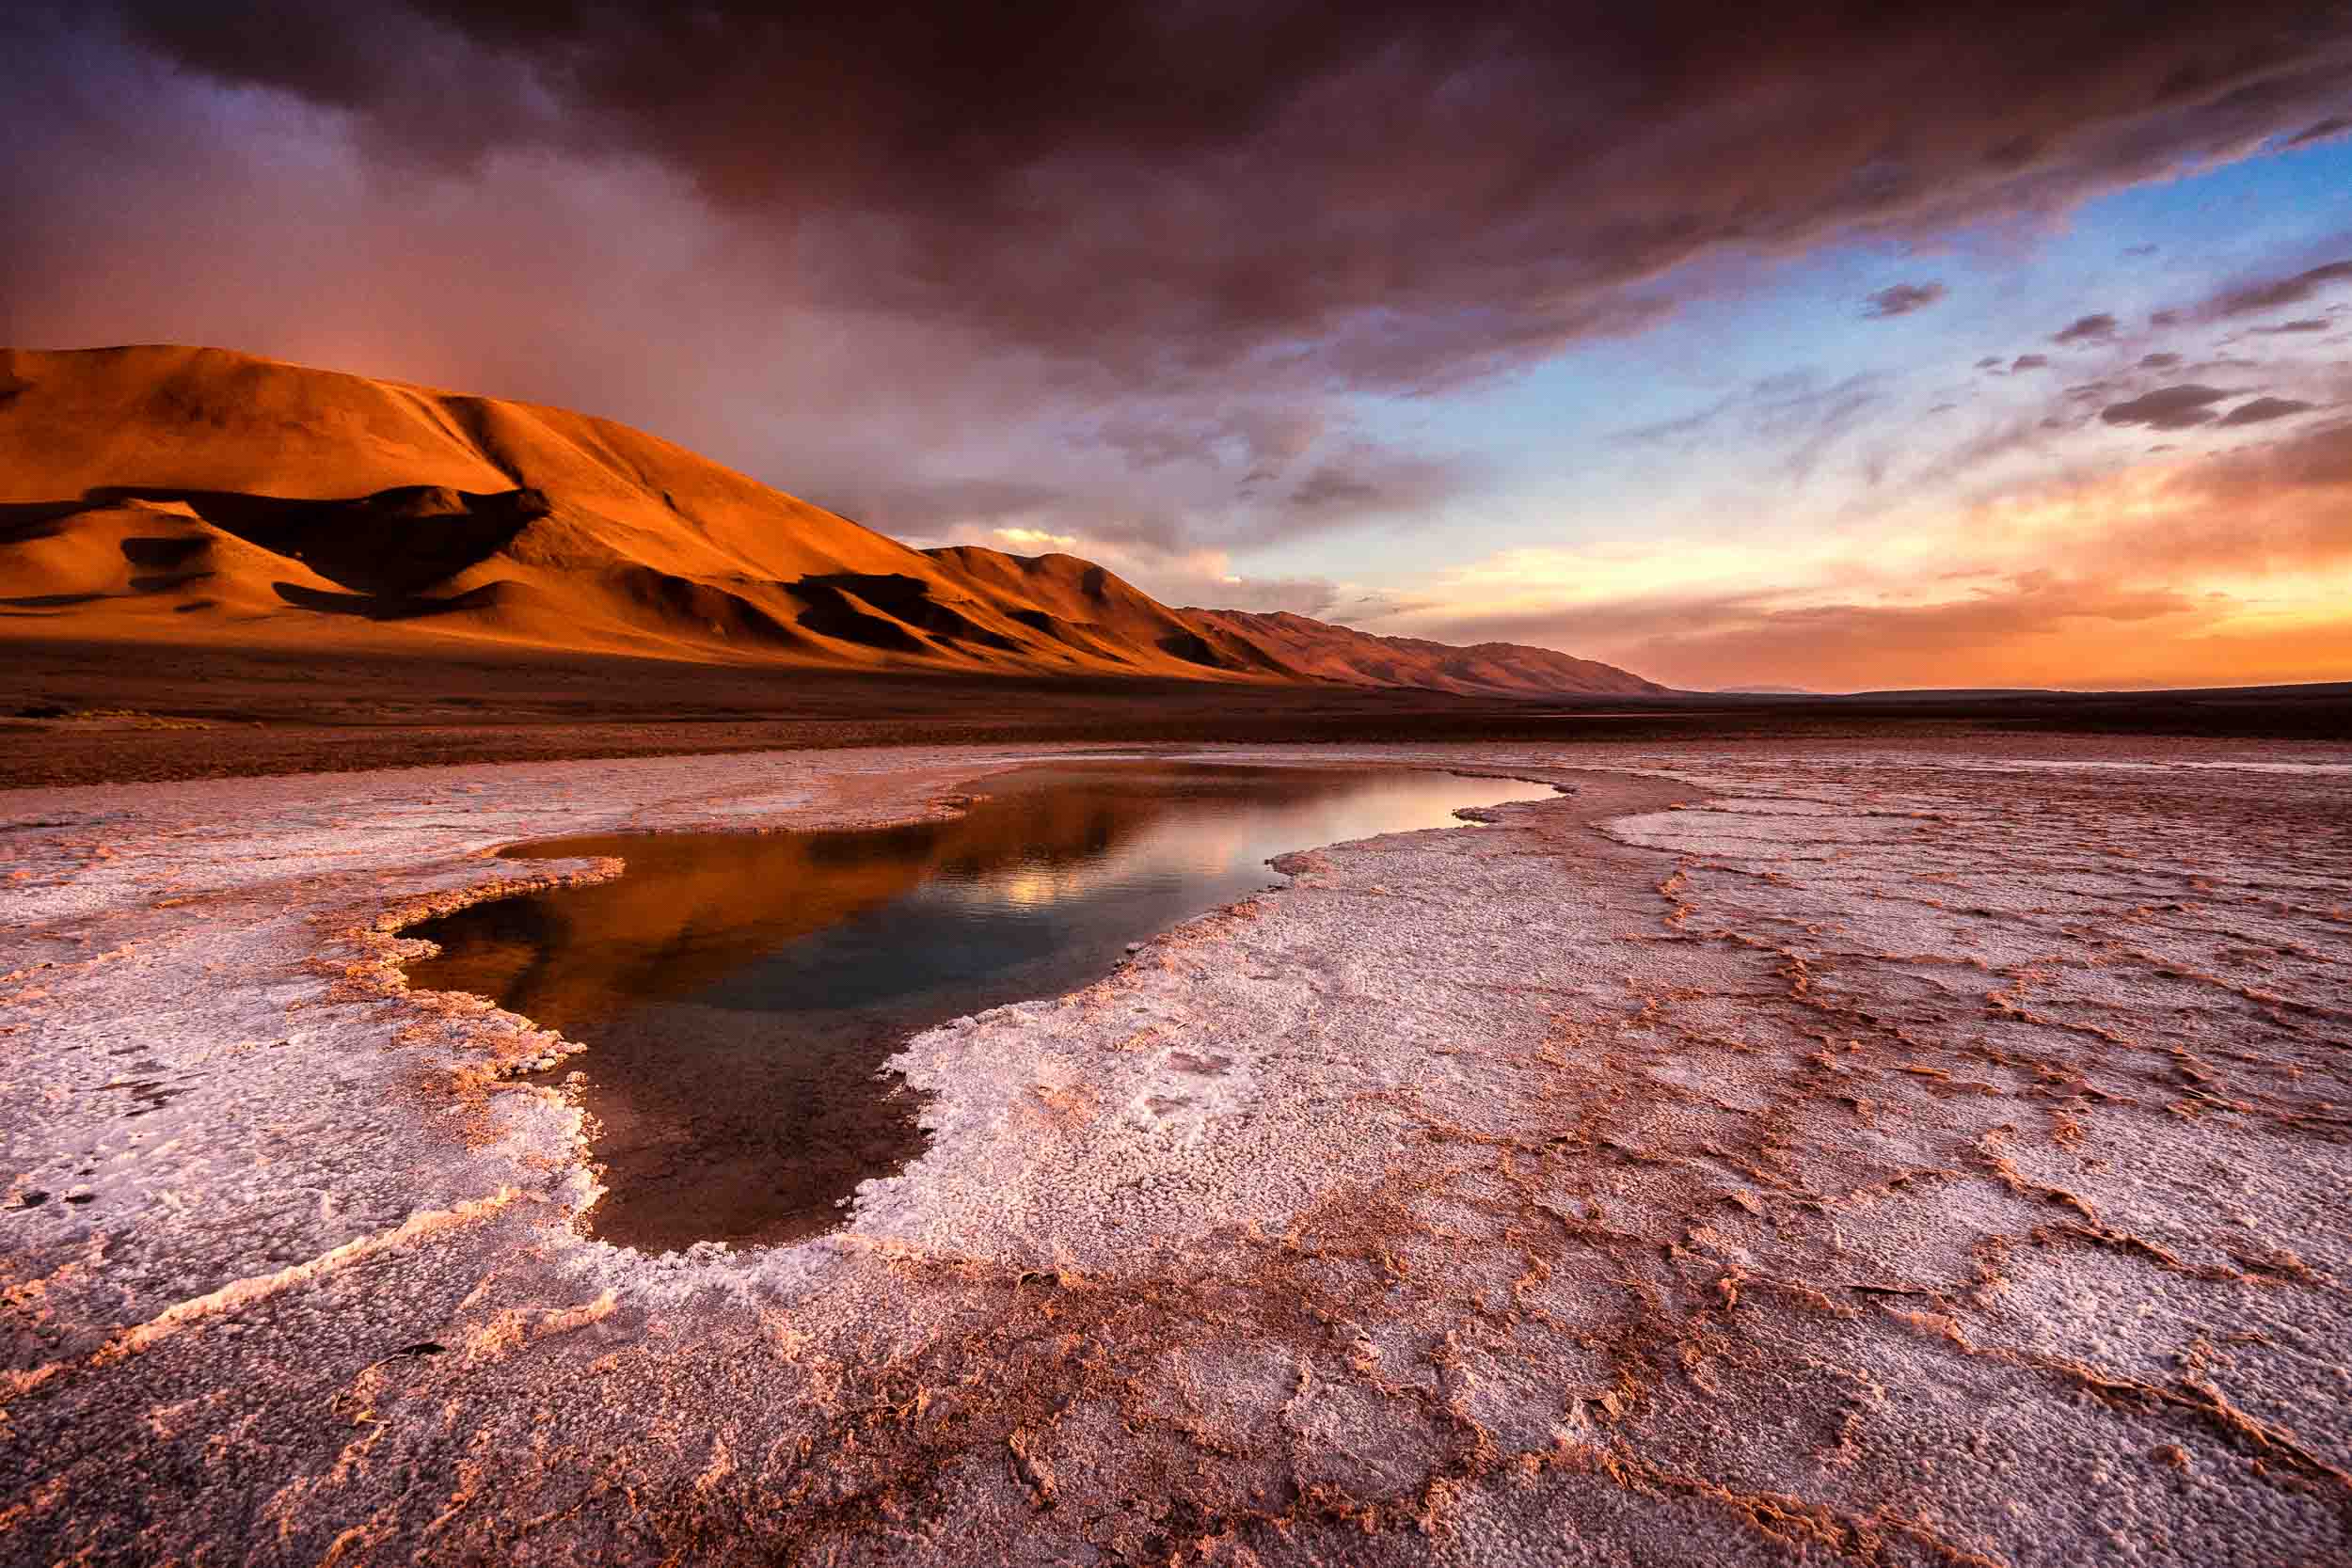 Forget Patagonia, could Salta be Argentina’s next adventure playground